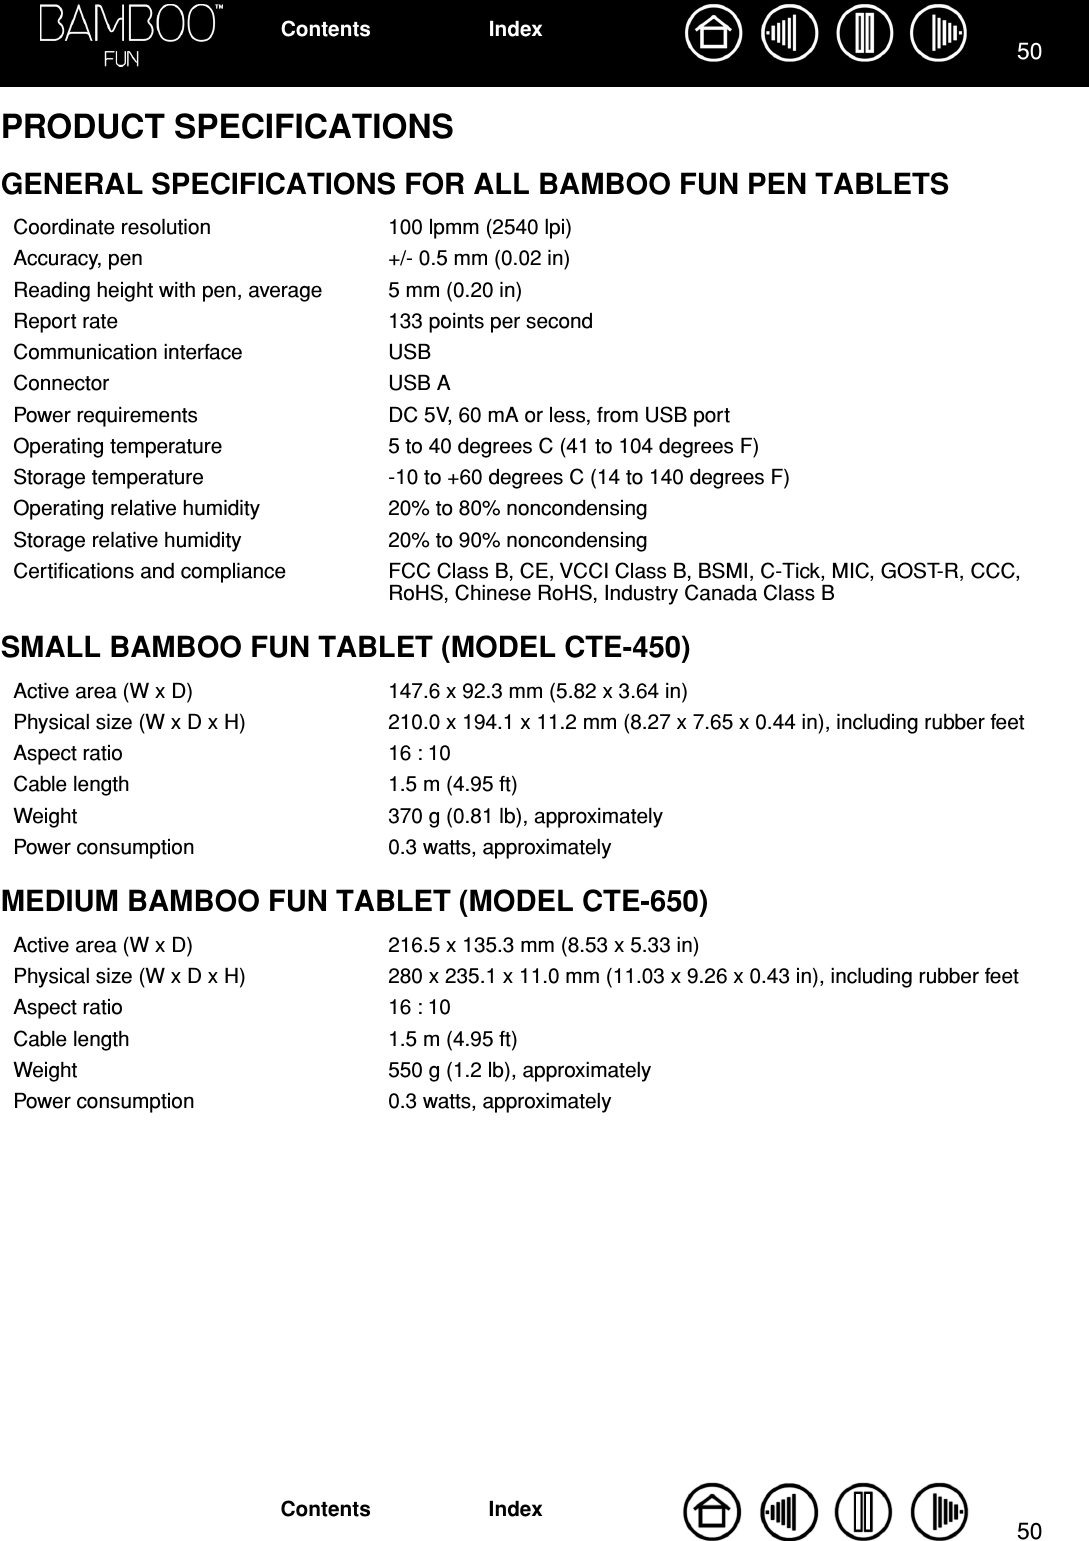 5050IndexContentsIndexContentsPRODUCT SPECIFICATIONSGENERAL SPECIFICATIONS FOR ALL BAMBOO FUN PEN TABLETSSMALL BAMBOO FUN TABLET (MODEL CTE-450)MEDIUM BAMBOO FUN TABLET (MODEL CTE-650)Coordinate resolution 100 lpmm (2540 lpi)Accuracy, pen +/- 0.5 mm (0.02 in)Reading height with pen, average 5 mm (0.20 in)Report rate 133 points per secondCommunication interface USBConnector USB APower requirements DC 5V, 60 mA or less, from USB portOperating temperature 5 to 40 degrees C (41 to 104 degrees F)Storage temperature -10 to +60 degrees C (14 to 140 degrees F)Operating relative humidity 20% to 80% noncondensingStorage relative humidity 20% to 90% noncondensingCertiﬁcations and compliance FCC Class B, CE, VCCI Class B, BSMI, C-Tick, MIC, GOST-R, CCC, RoHS, Chinese RoHS, Industry Canada Class BActive area (W x D) 147.6 x 92.3 mm (5.82 x 3.64 in)Physical size (W x D x H) 210.0 x 194.1 x 11.2 mm (8.27 x 7.65 x 0.44 in), including rubber feetAspect ratio 16 : 10Cable length 1.5 m (4.95 ft)Weight 370 g (0.81 lb), approximatelyPower consumption 0.3 watts, approximatelyActive area (W x D) 216.5 x 135.3 mm (8.53 x 5.33 in)Physical size (W x D x H) 280 x 235.1 x 11.0 mm (11.03 x 9.26 x 0.43 in), including rubber feetAspect ratio 16 : 10Cable length 1.5 m (4.95 ft)Weight 550 g (1.2 lb), approximatelyPower consumption 0.3 watts, approximately